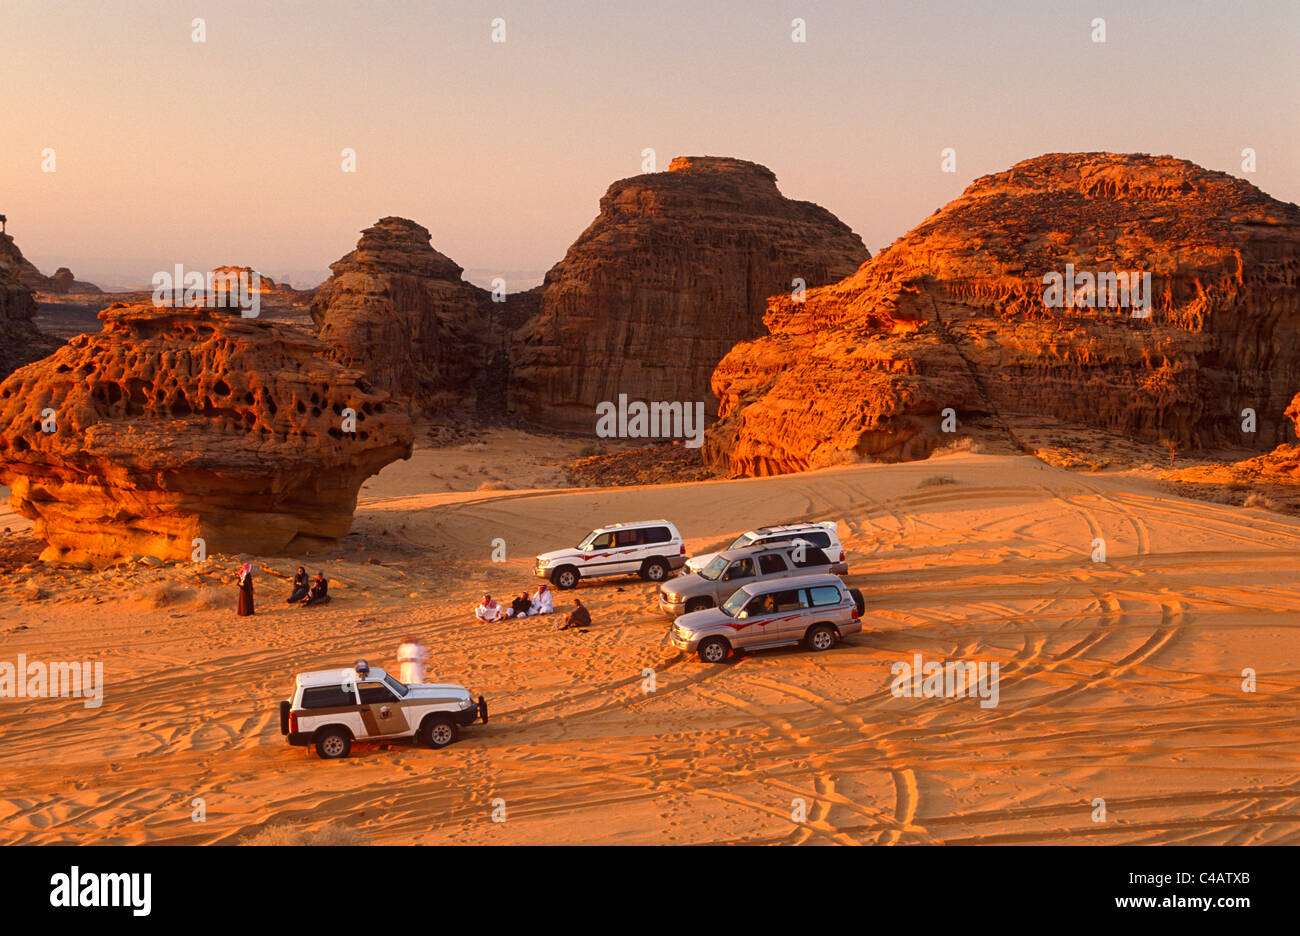 Saudi Arabia, Madinah, Al-Ula. Tourists enjoy 4WD excursions in the spectacular wadis and rugged hills that comprise the desert Stock Photo